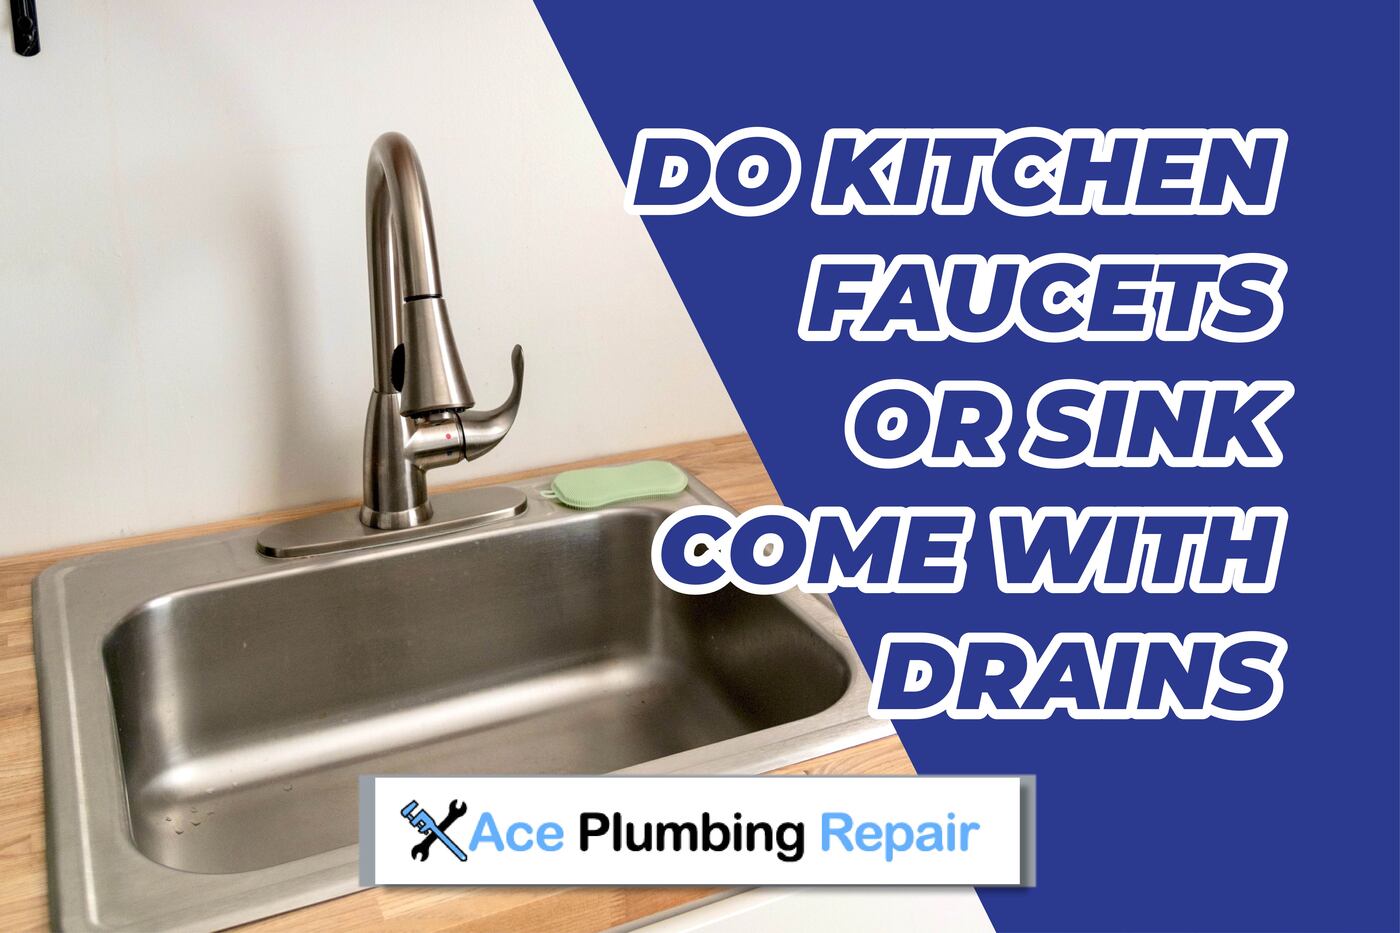 Do kitchen faucets come with drains